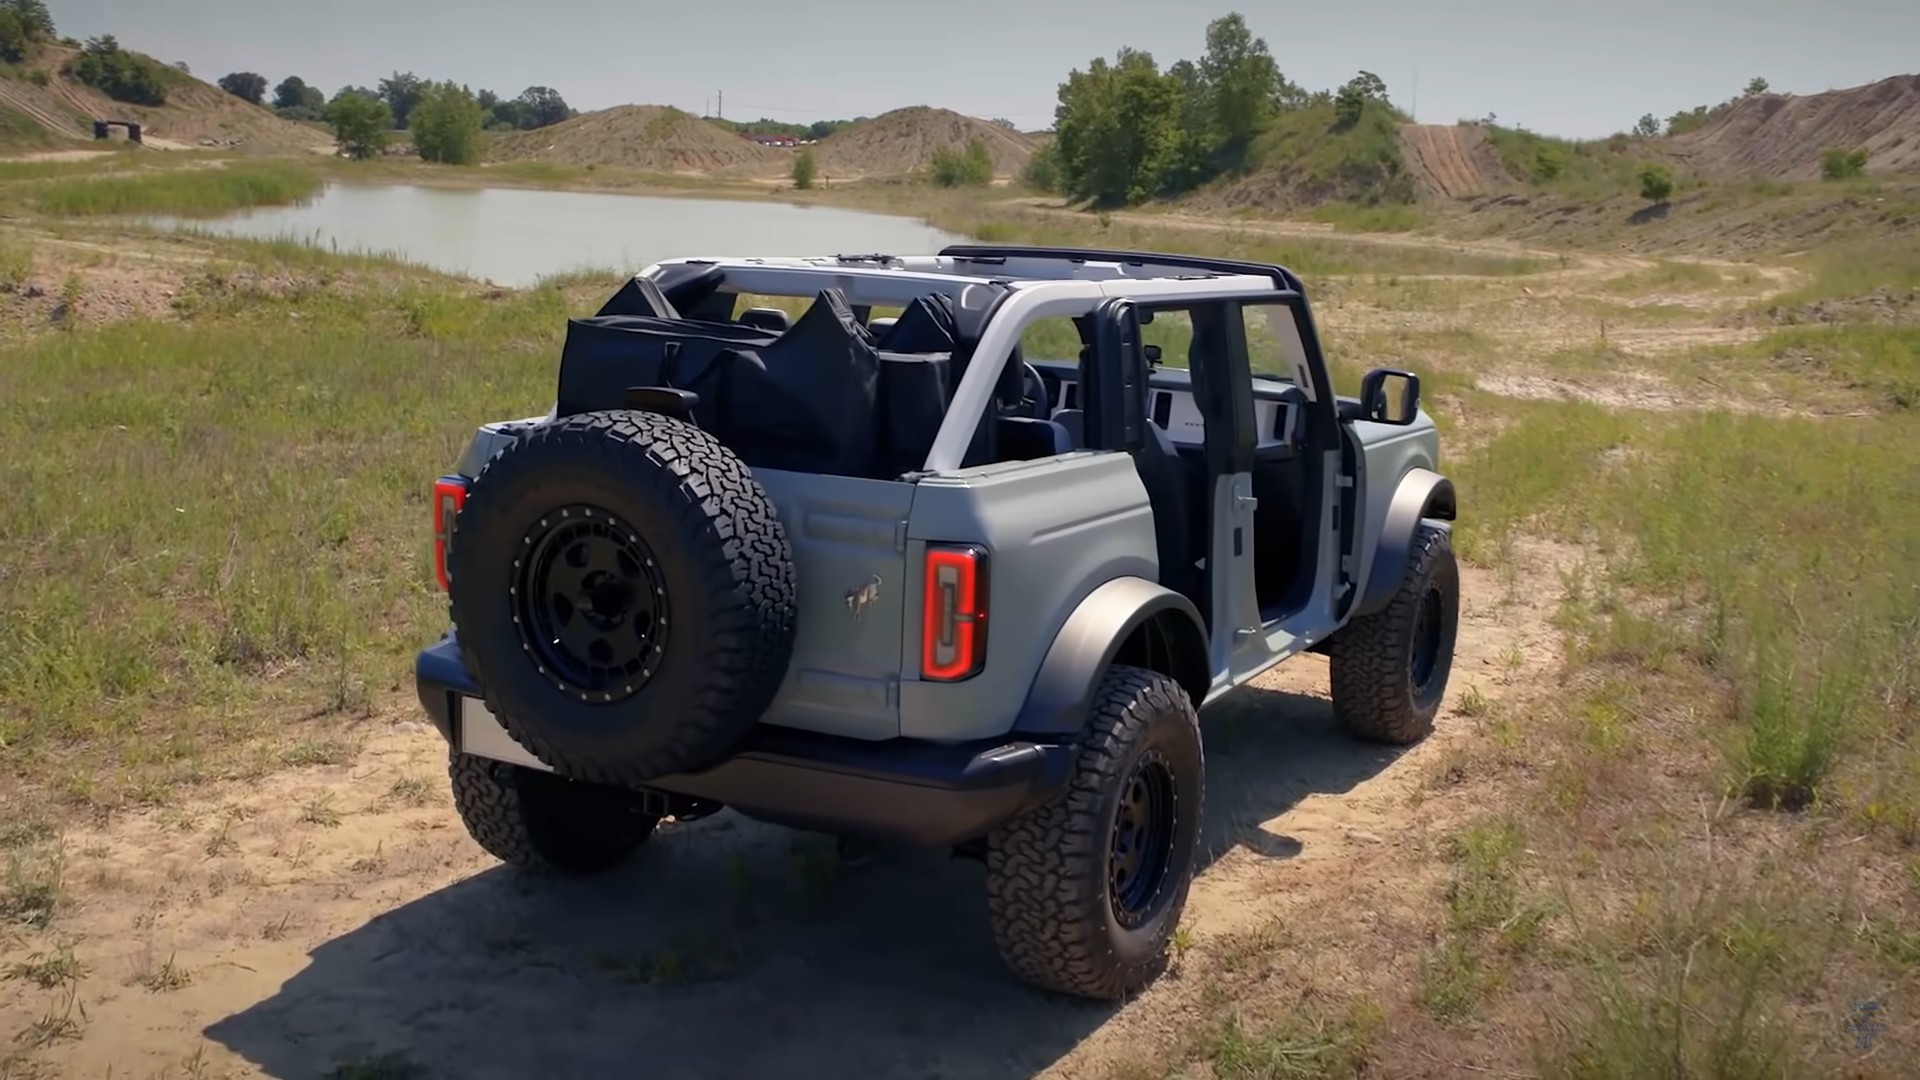 Ford Bronco to offer hundreds of accessories for off-roading